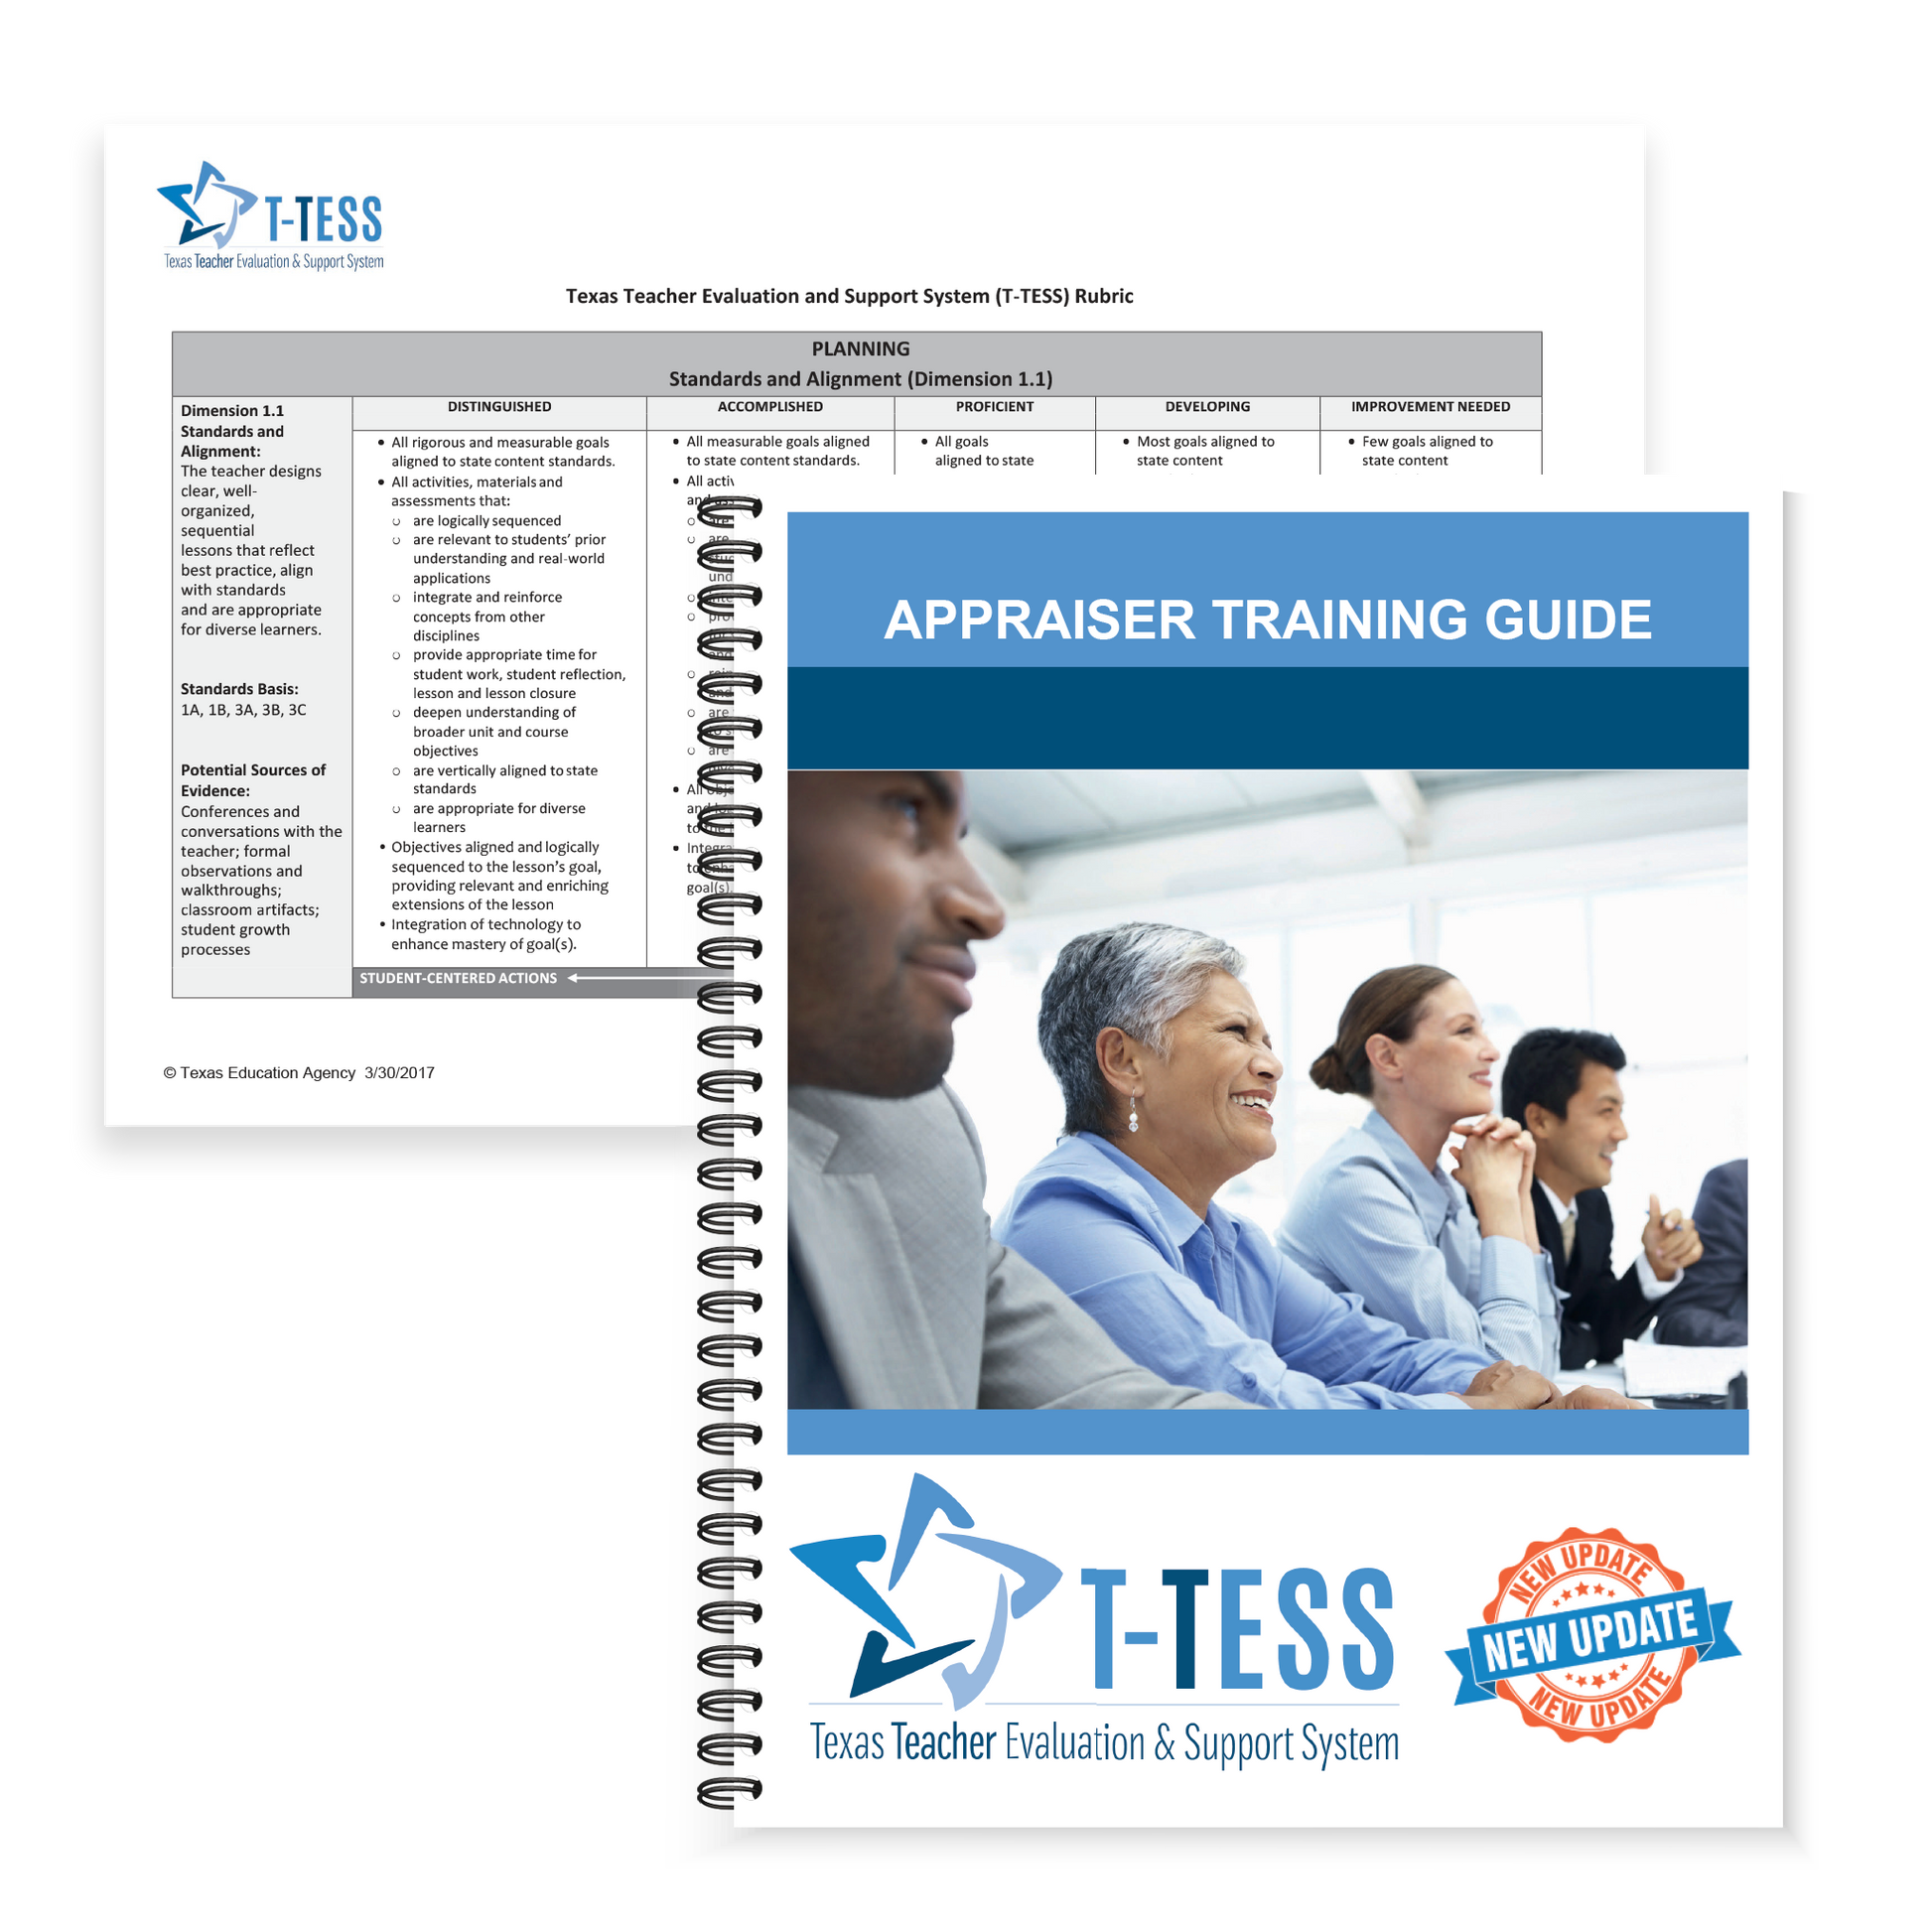 Preview of the blue and gray front pages and covers for two prodcuts included in the Region 13 T-TESS Appraiser Training Guide and T-TESS Rubric. 